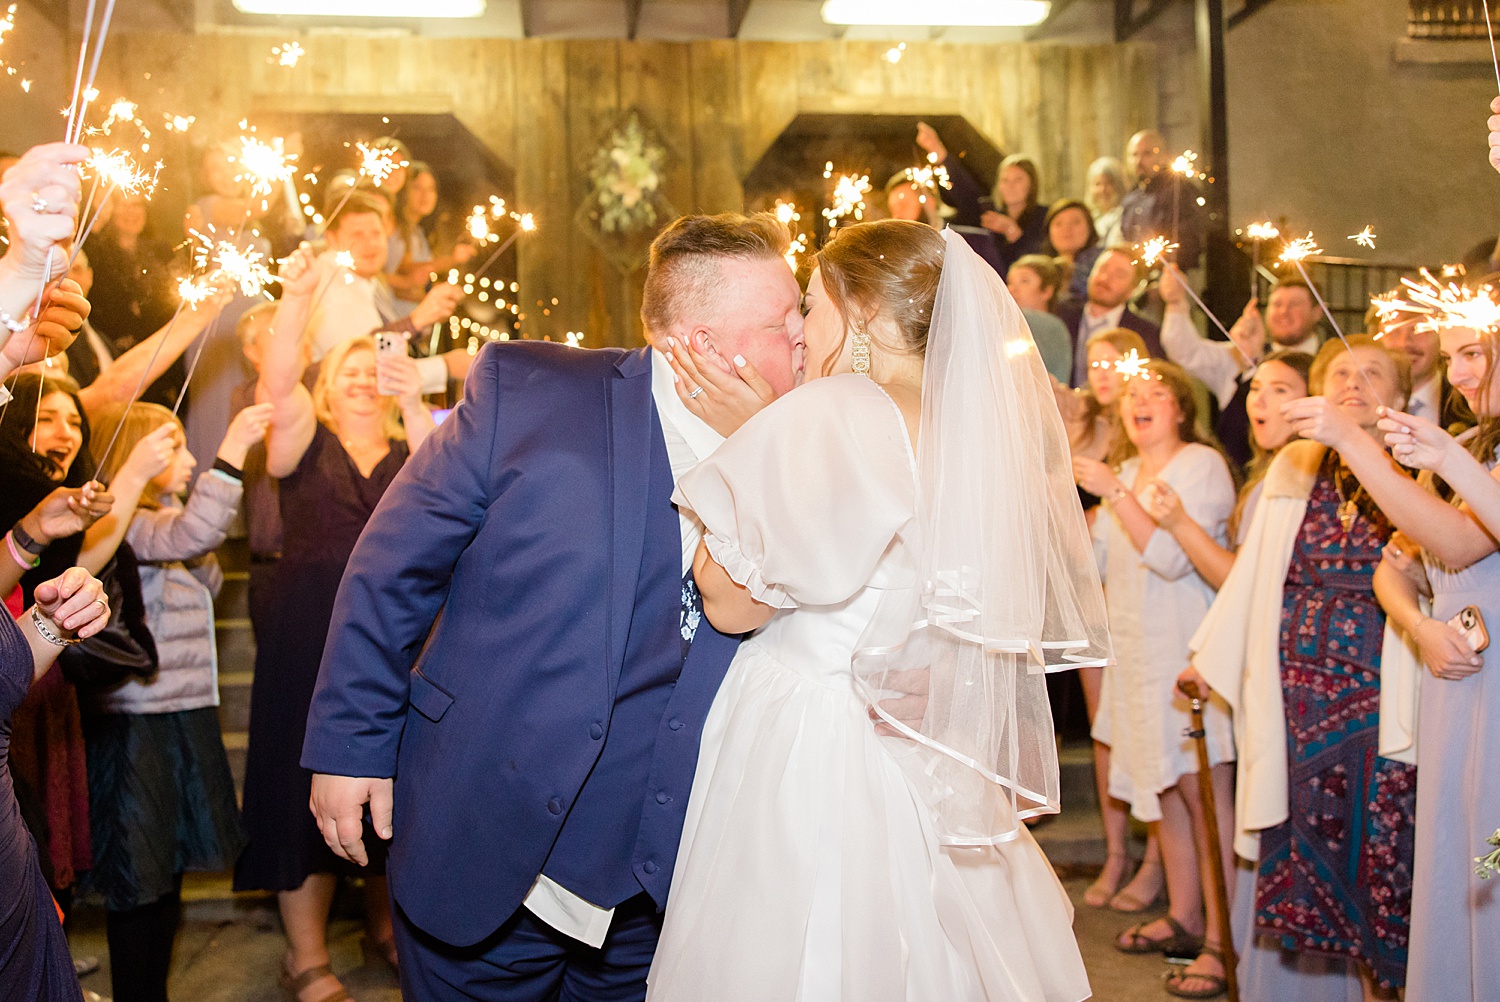 newlyweds kiss during sparkler exit